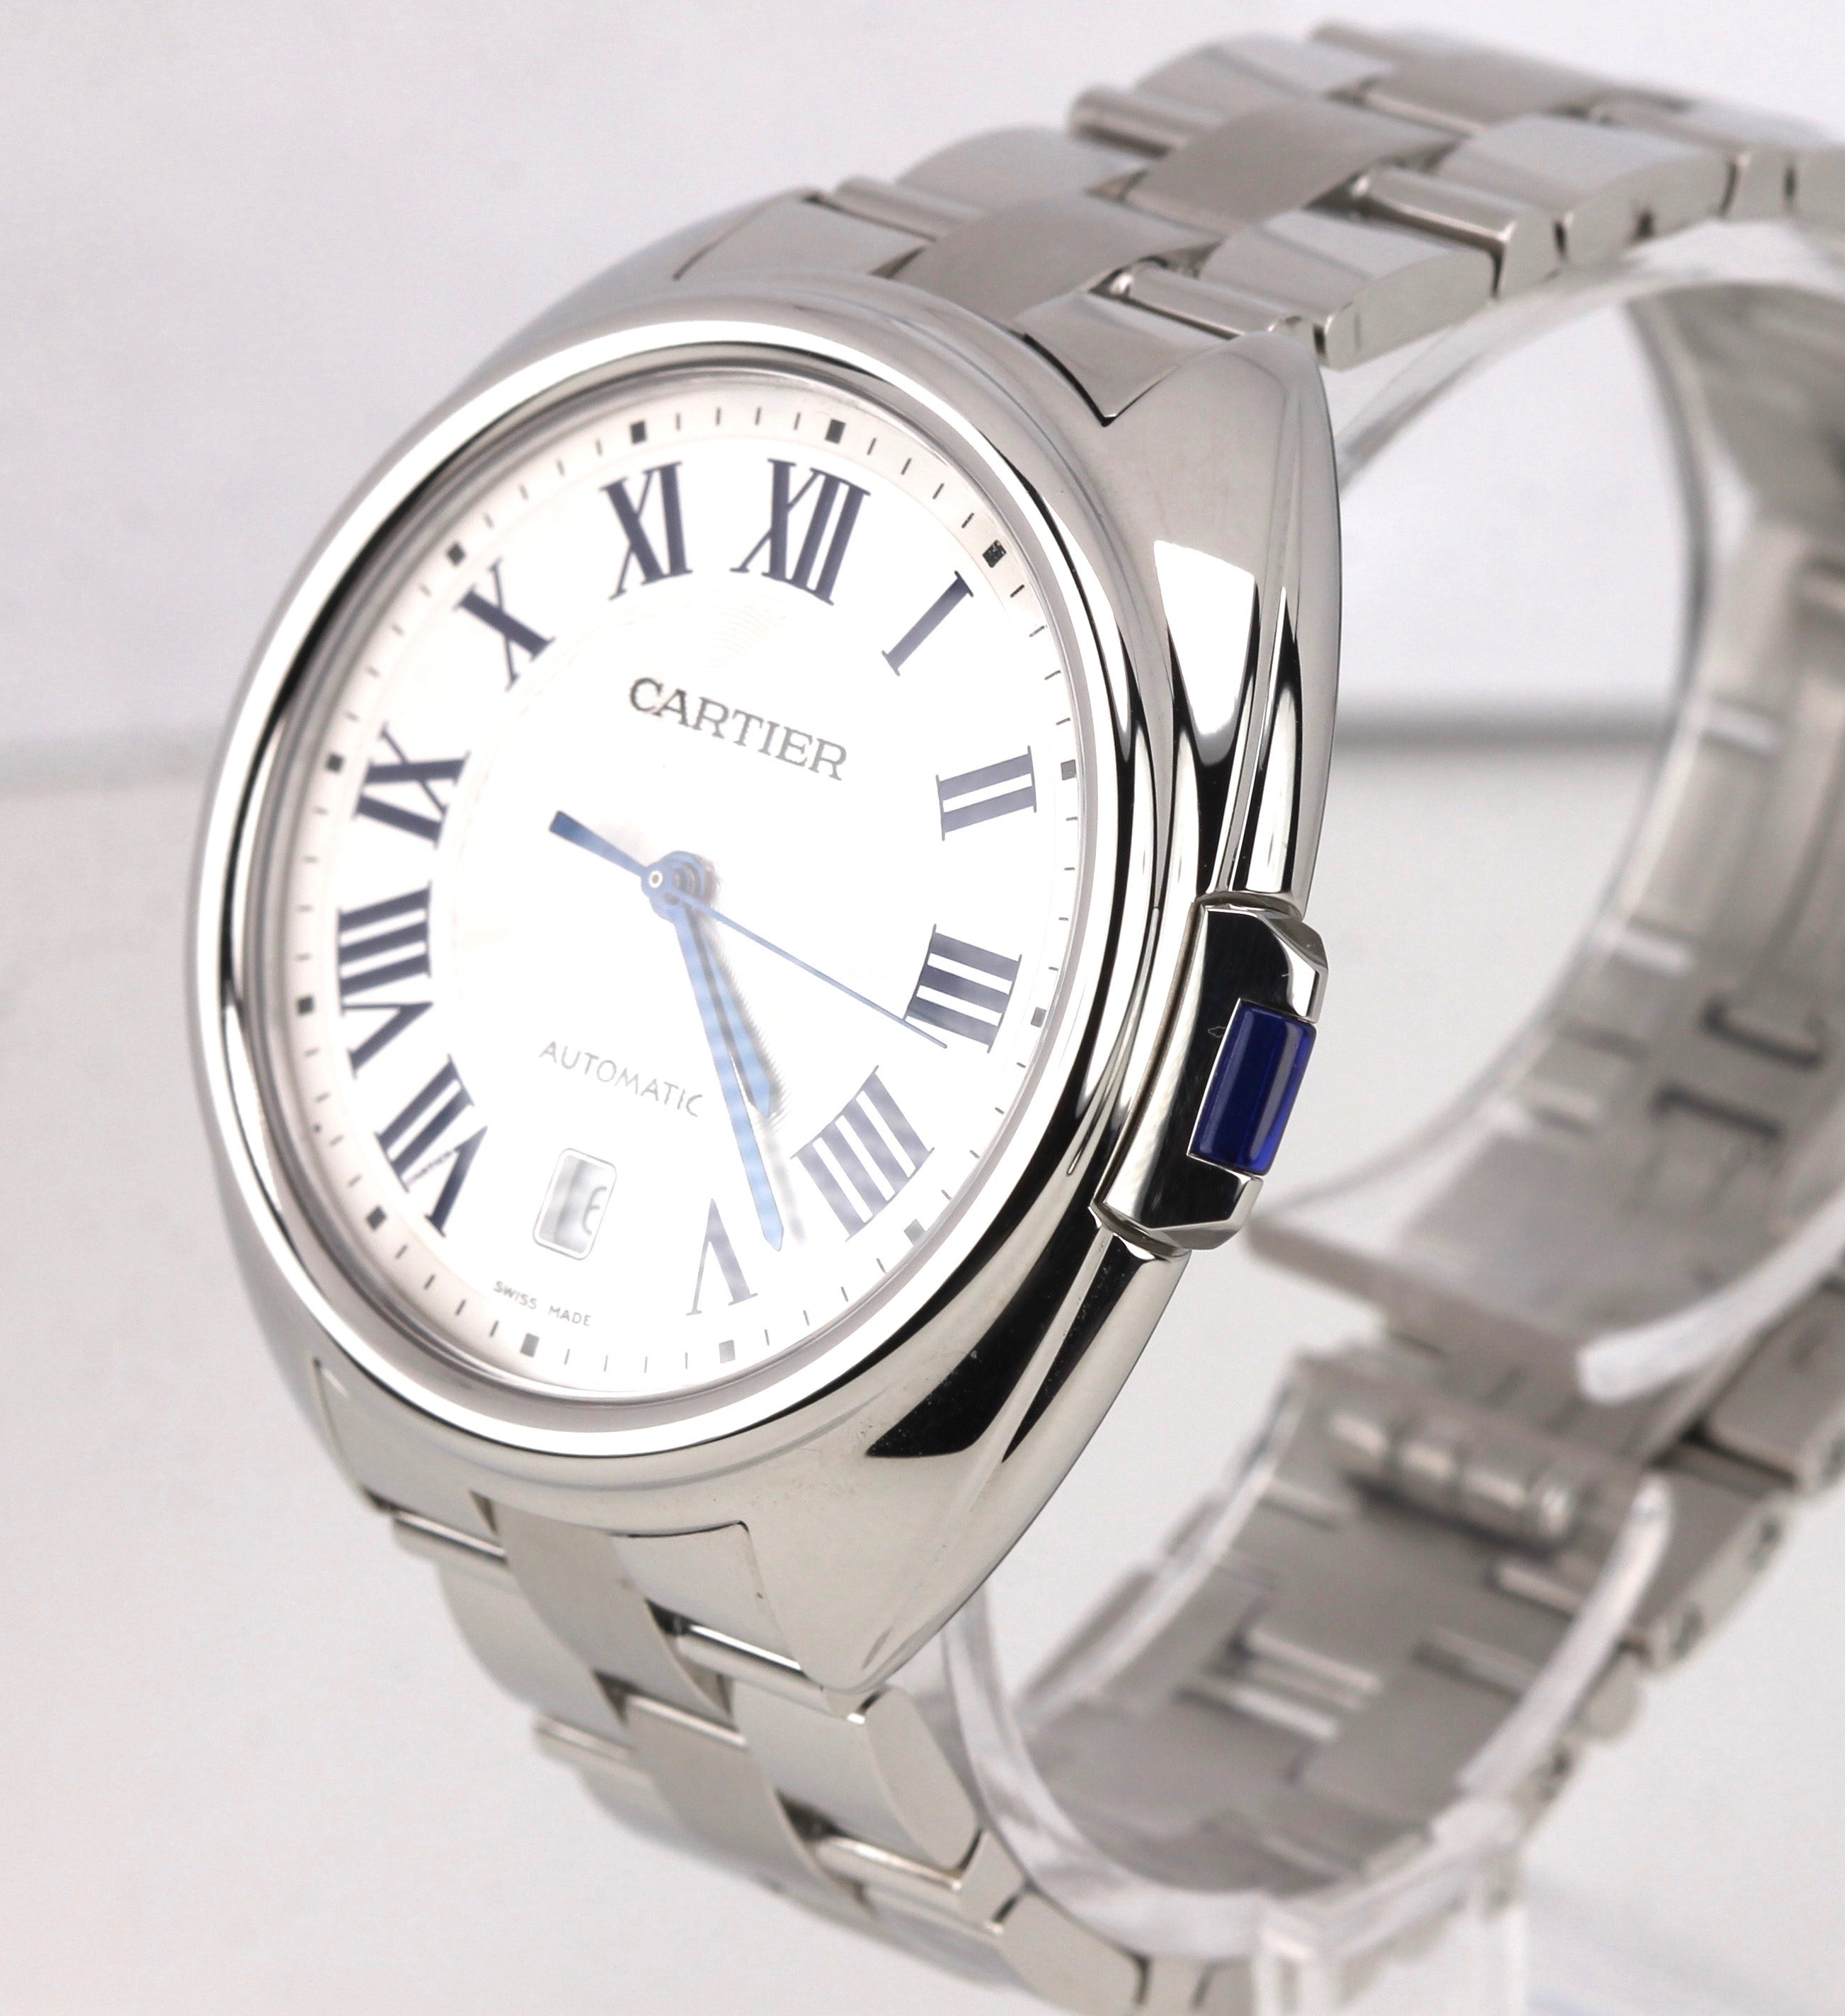 2017 Cartier Clé Cle Automatic WSCL0007 3847 40mm Stainless Steel Date Watch